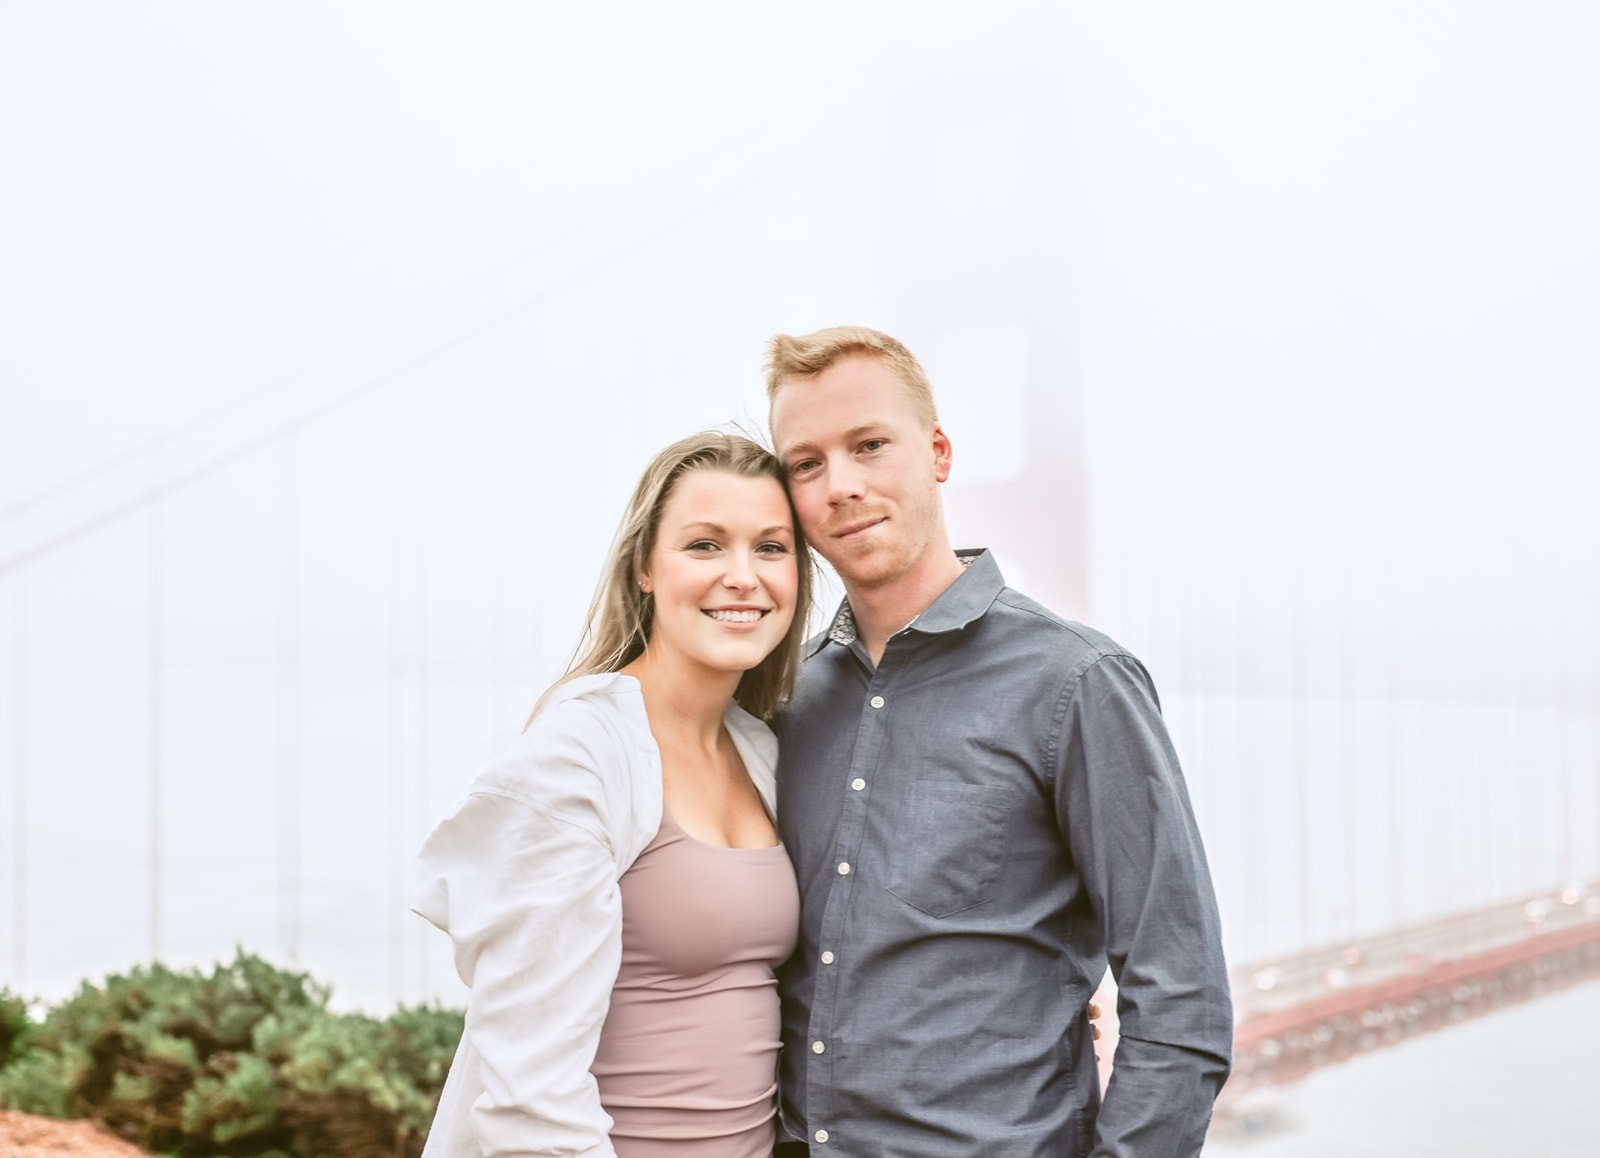 Proposal engagement photography at Battery Spencer with Golden Gate Bridge on a cloudy day in San Francisco